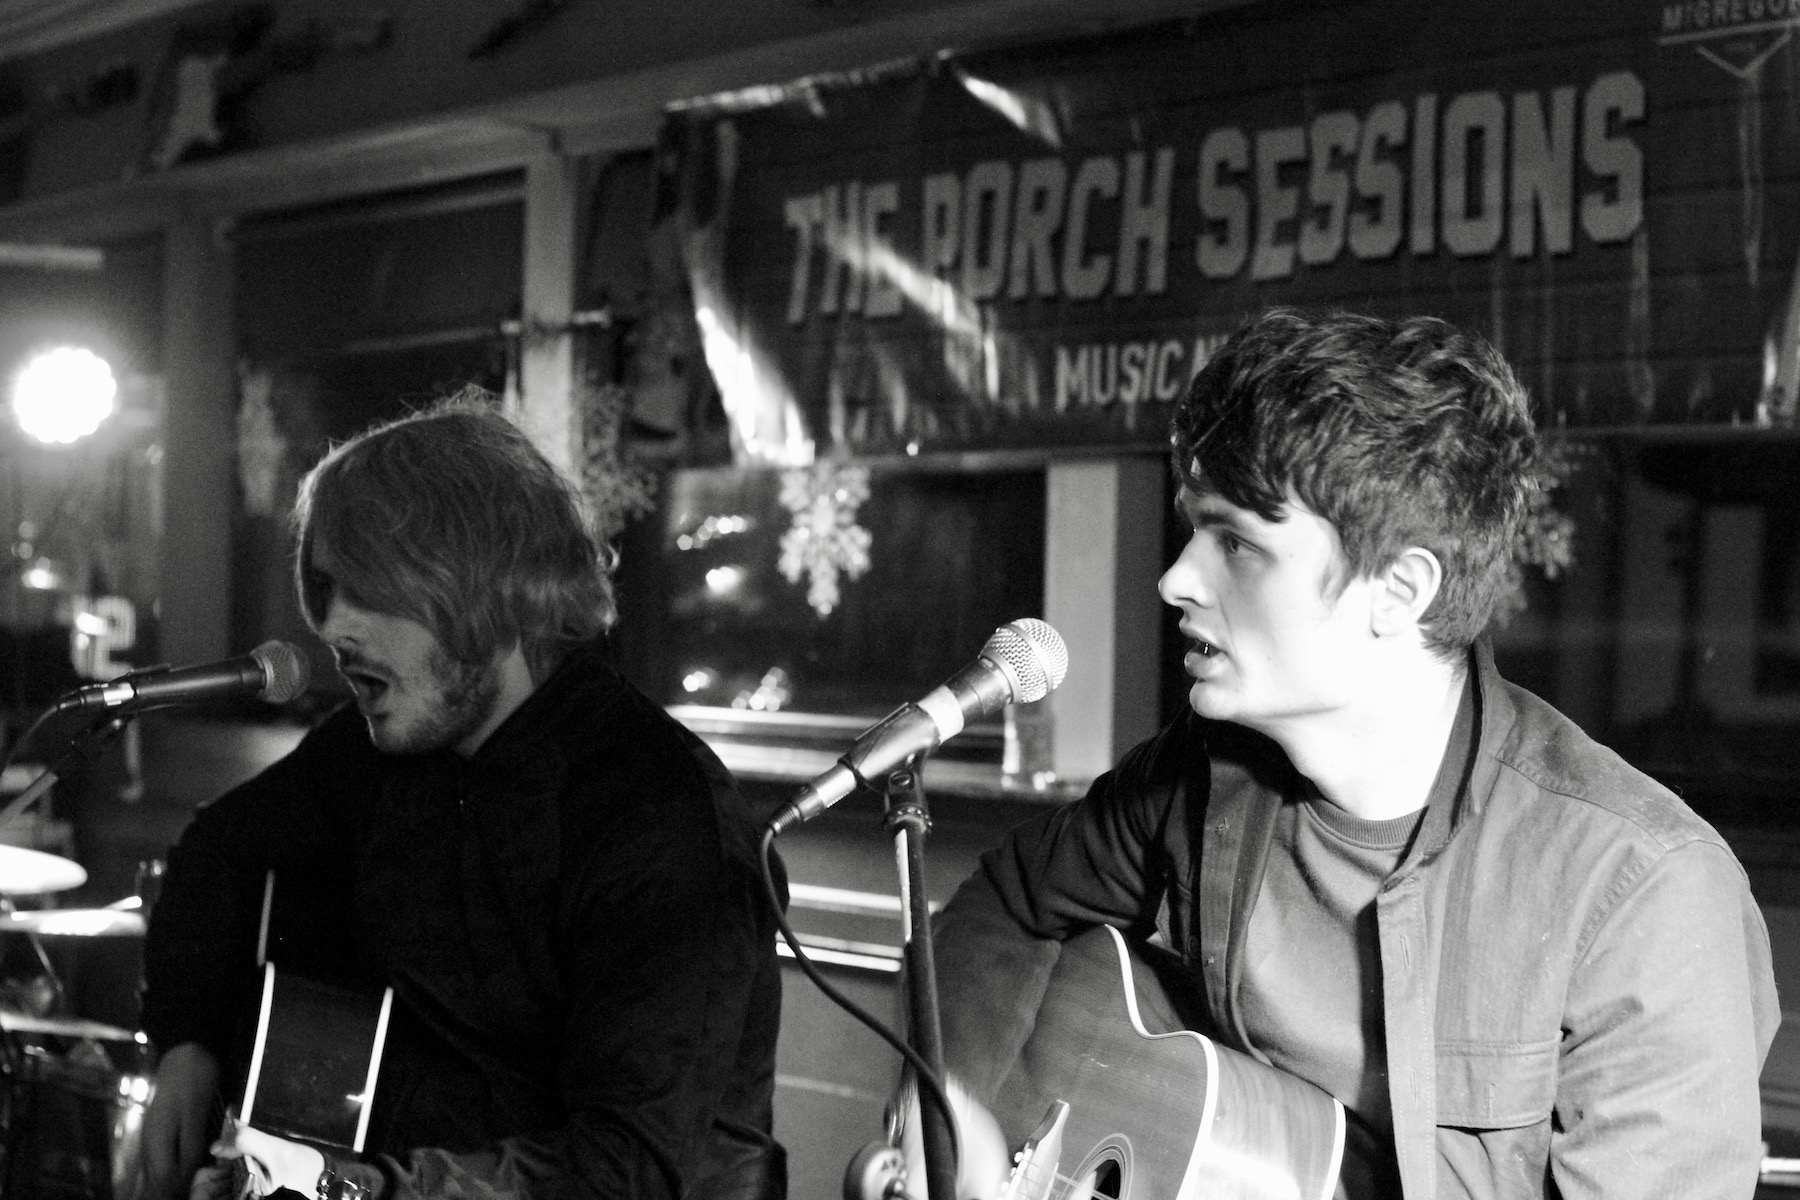 The Oxides at The Porch Sessions Inverness December 20183070 - The Porch Sessions, 8/12/2018 - Images